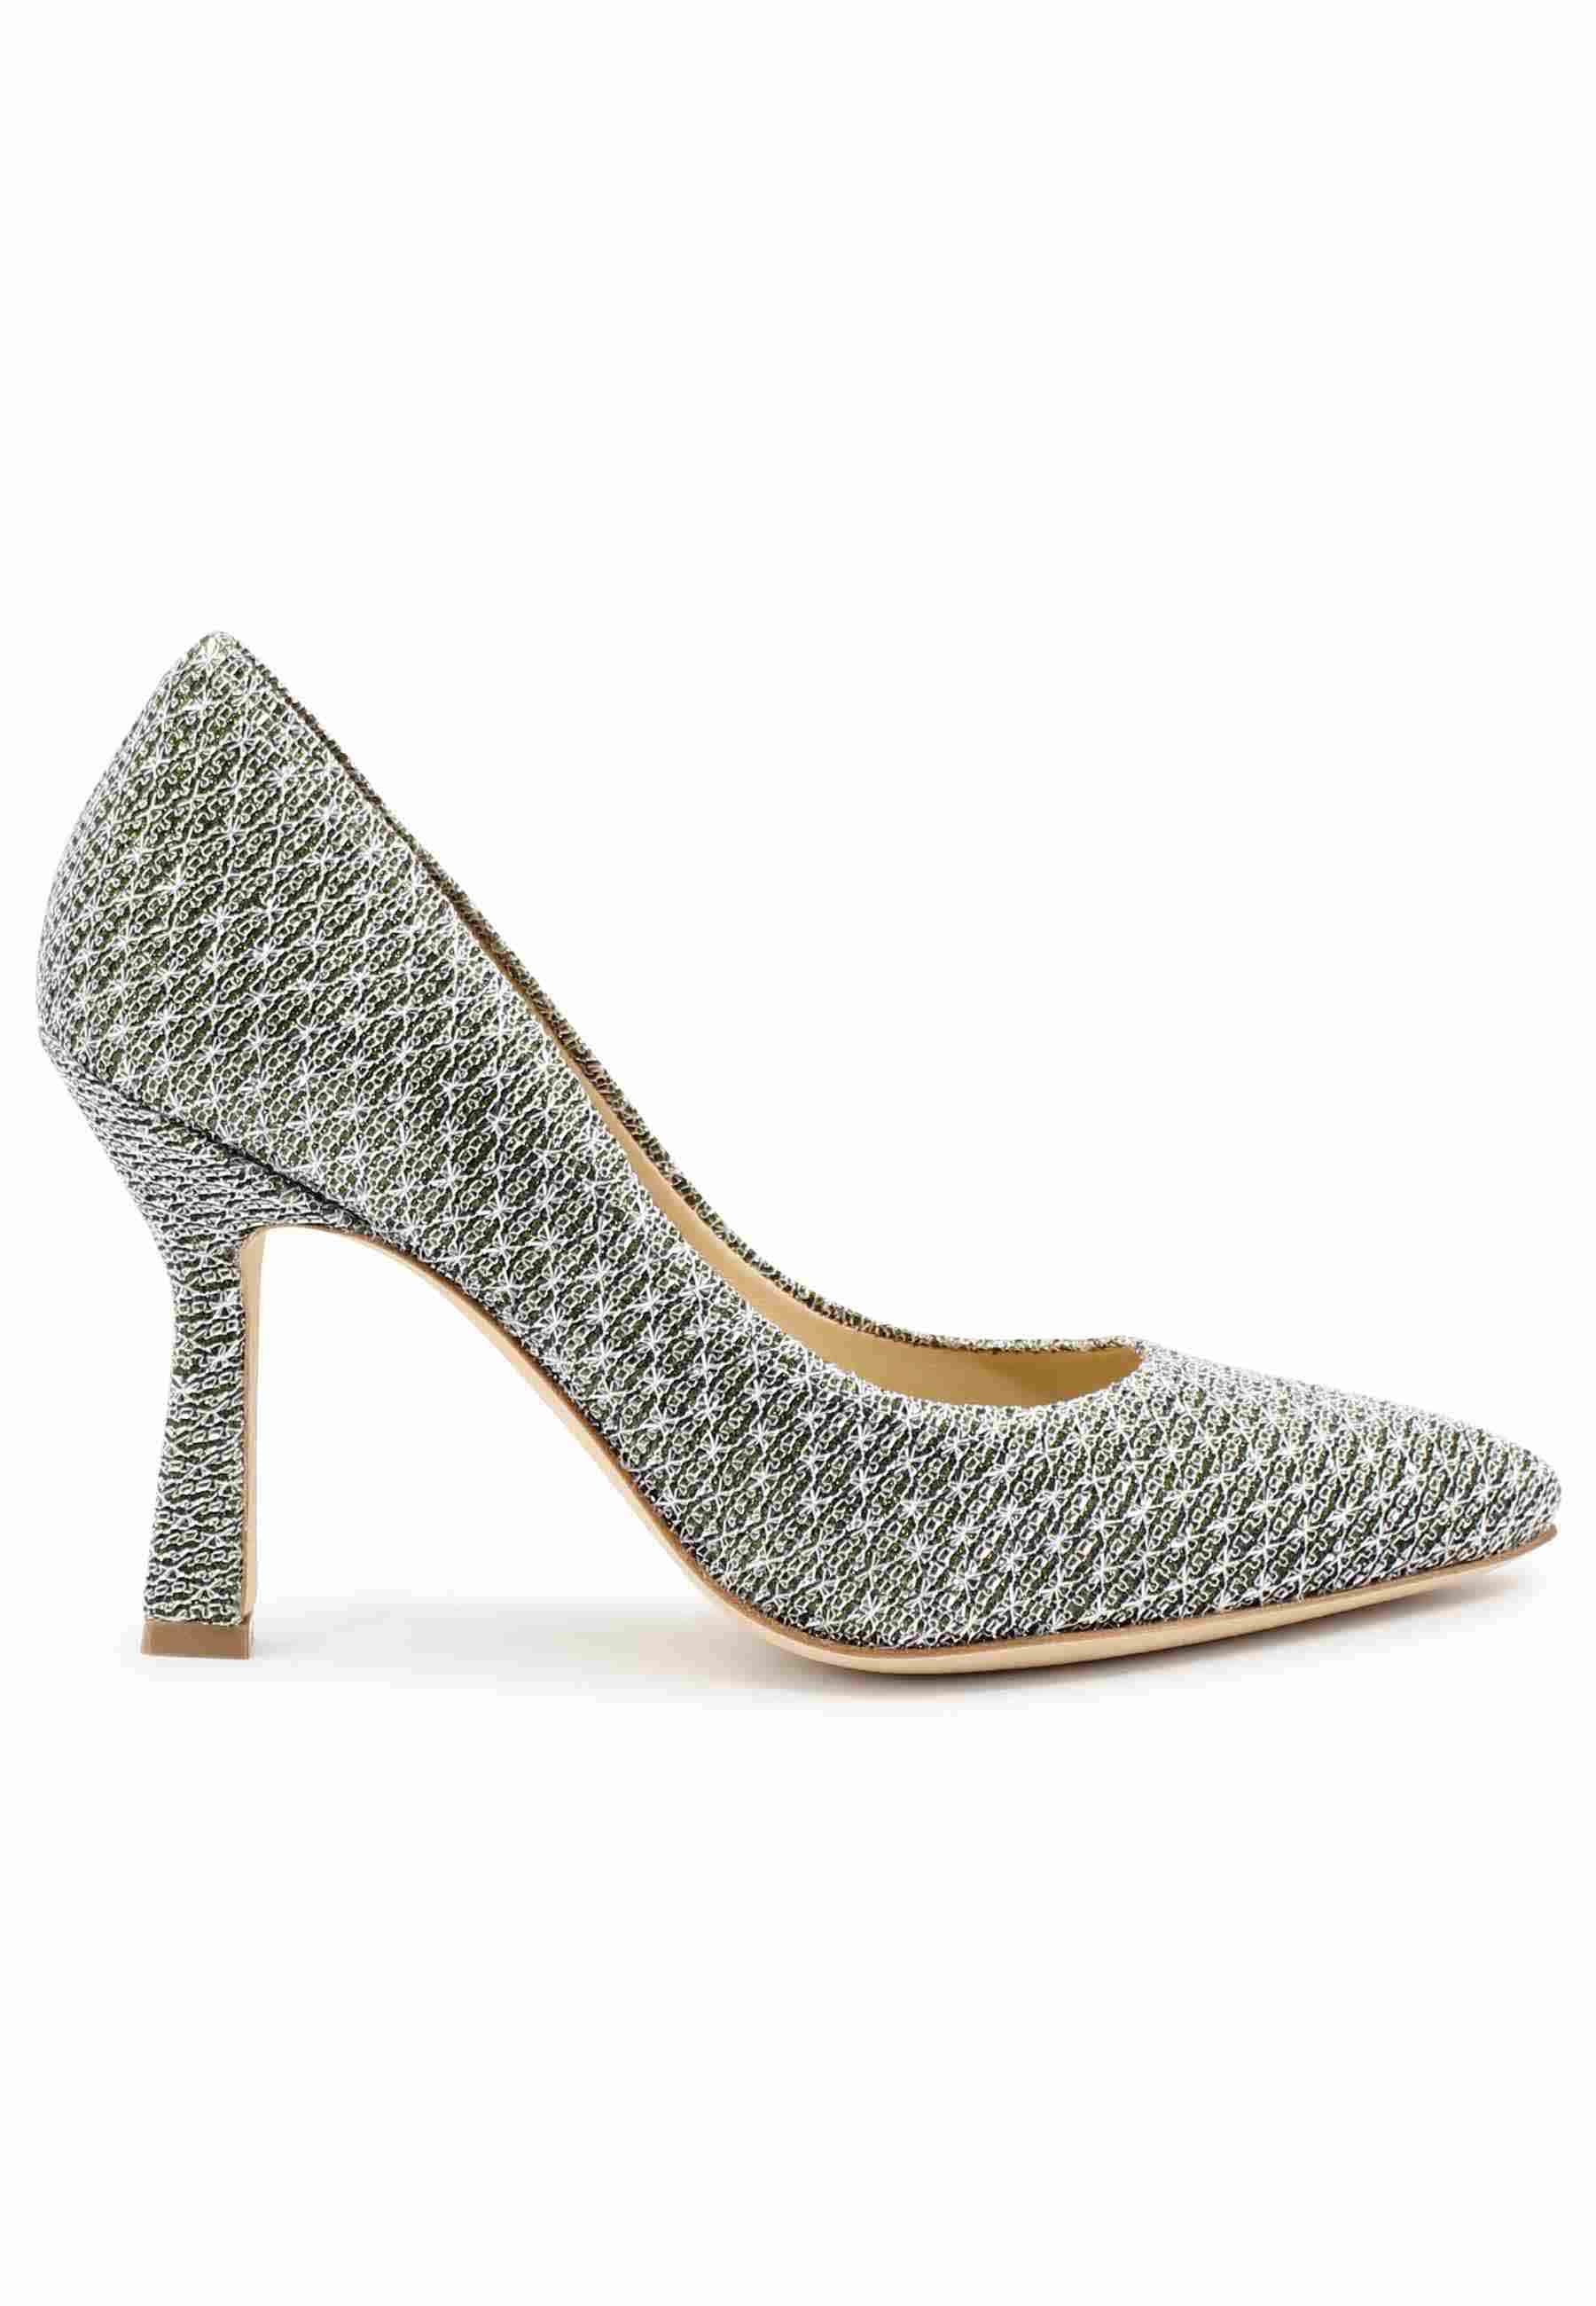 Decollete DE1002/RT in silver lux fabric with high heel